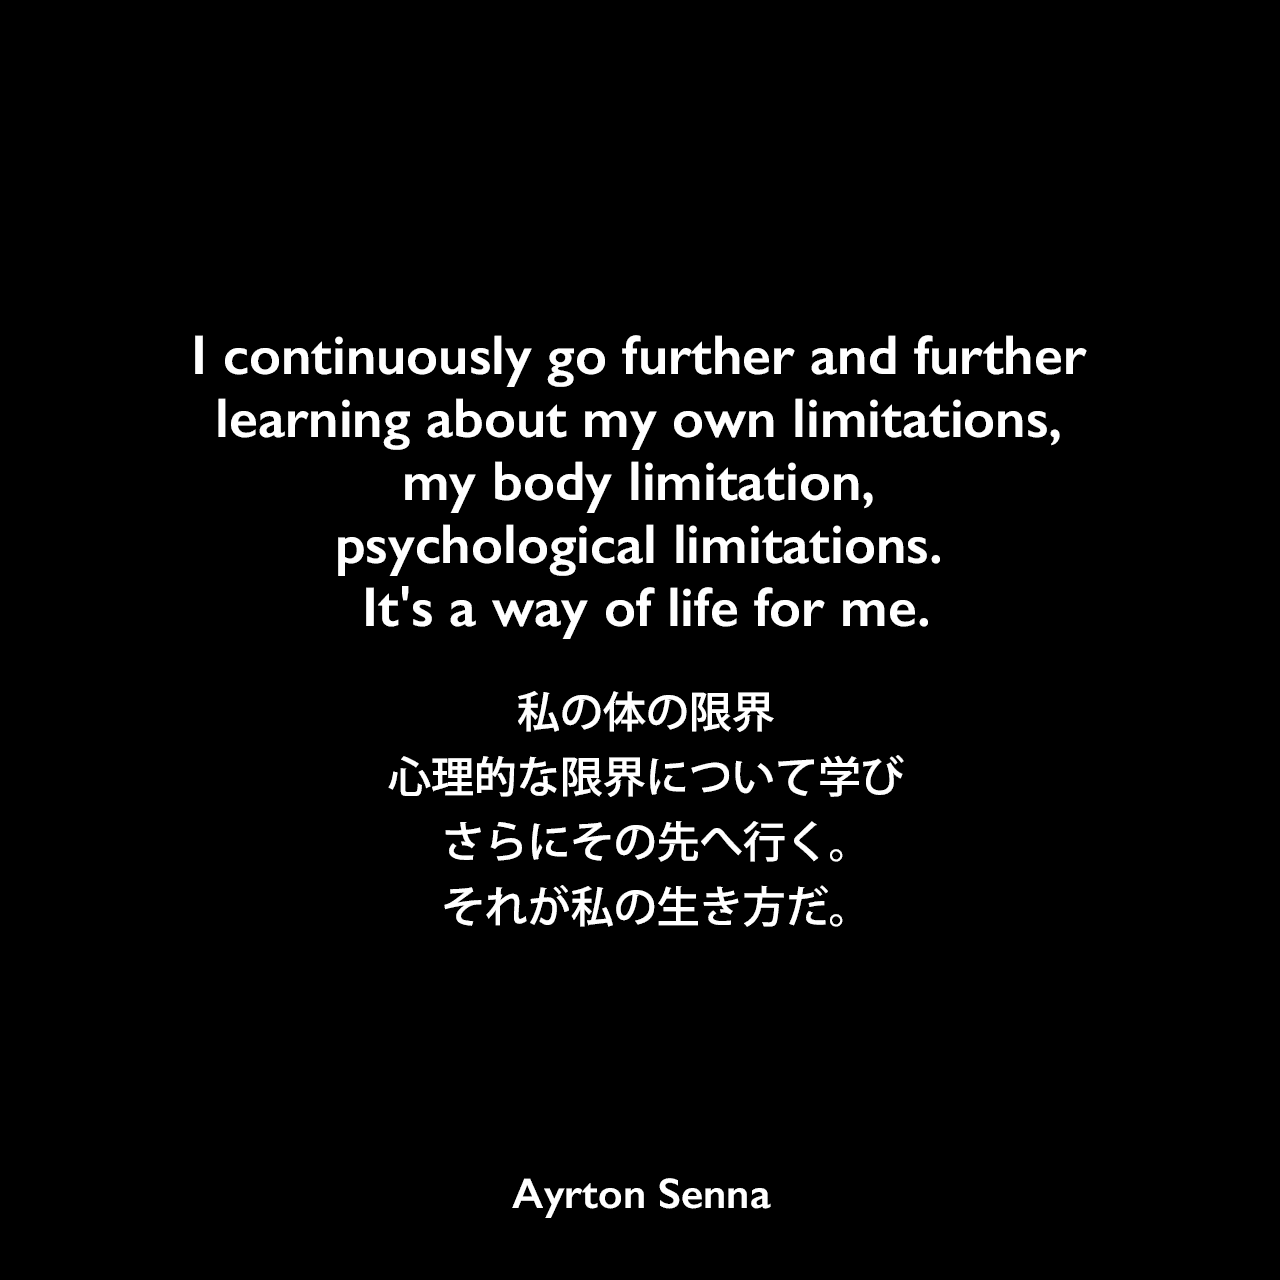 I continuously go further and further learning about my own limitations, my body limitation, psychological limitations. It's a way of life for me.私の体の限界、心理的な限界について学び、さらにその先へ行く。それが私の生き方だ。Ayrton Senna